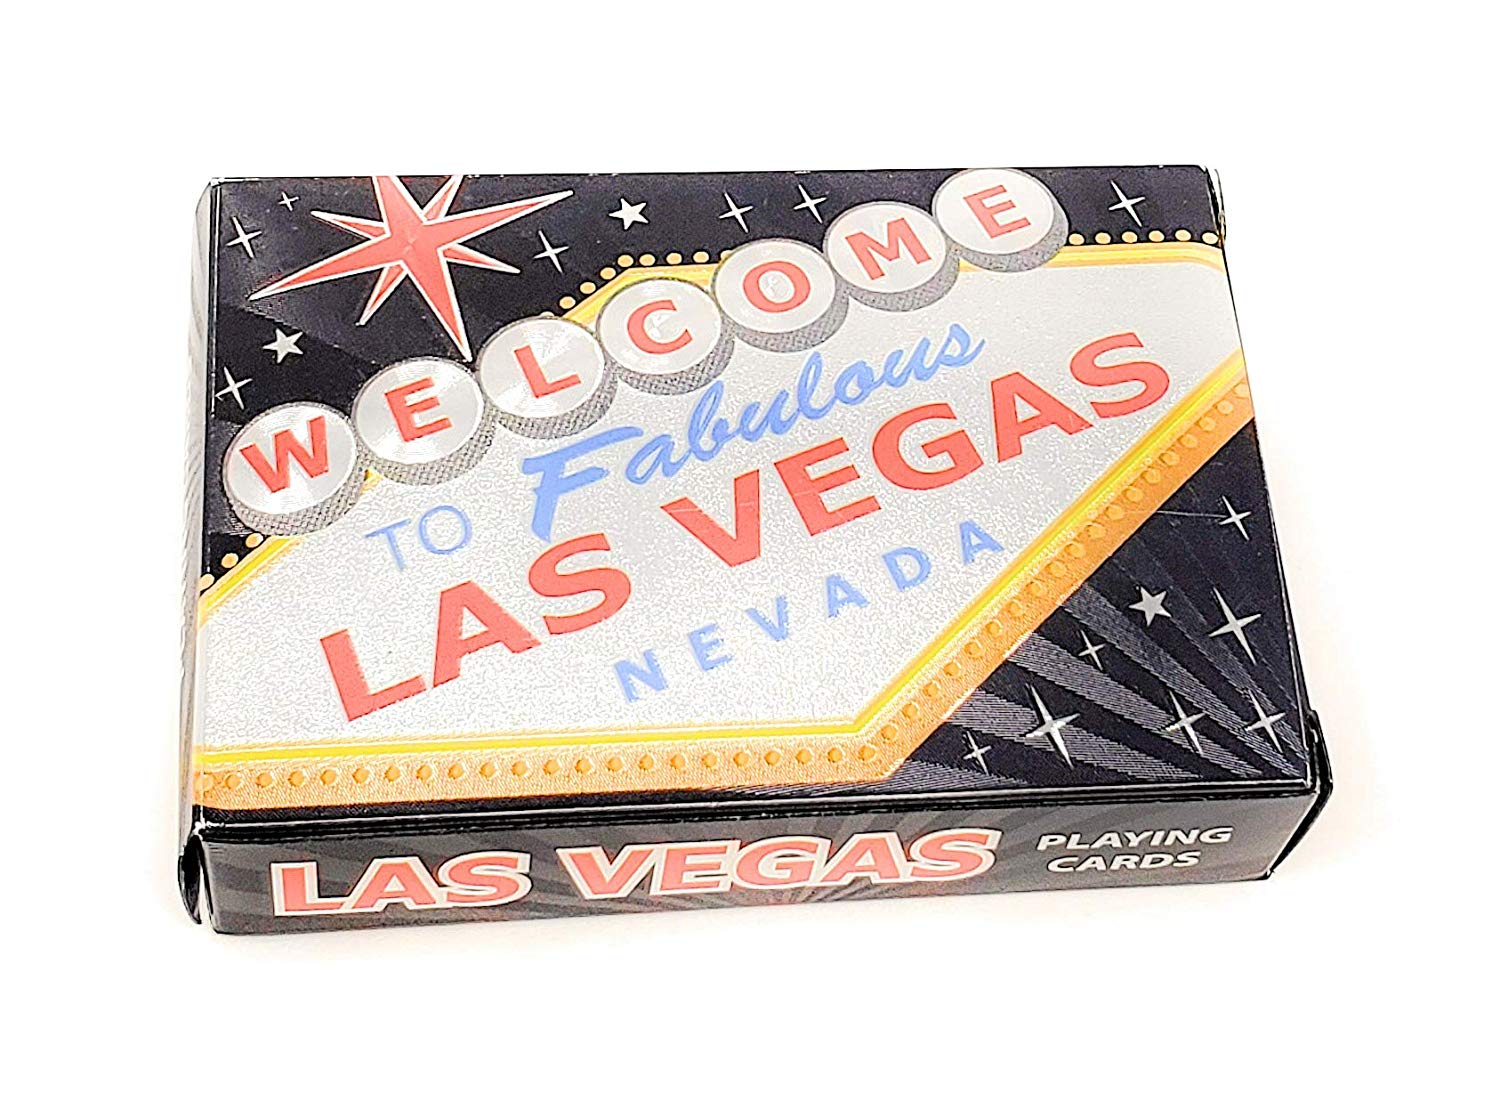 Four ace playing cards illustration, Welcome to Fabulous Las Vegas